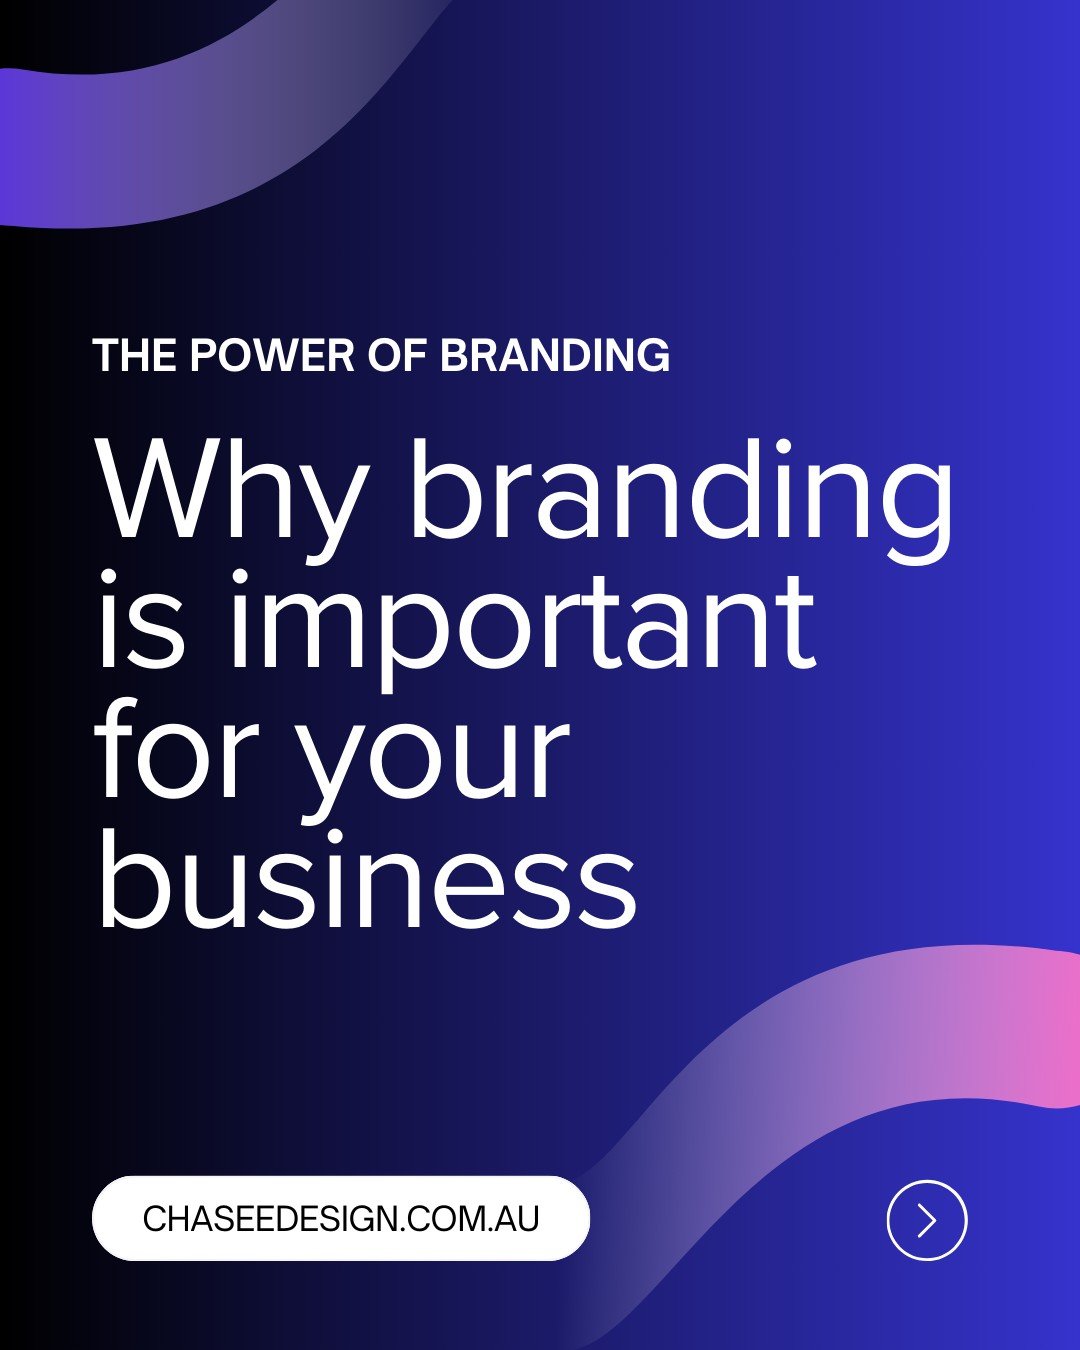 Planning ahead saves time and energy, particularly when it comes to running your own business. #Branding #BusinessOwners #DigitalAgency #WebDesign